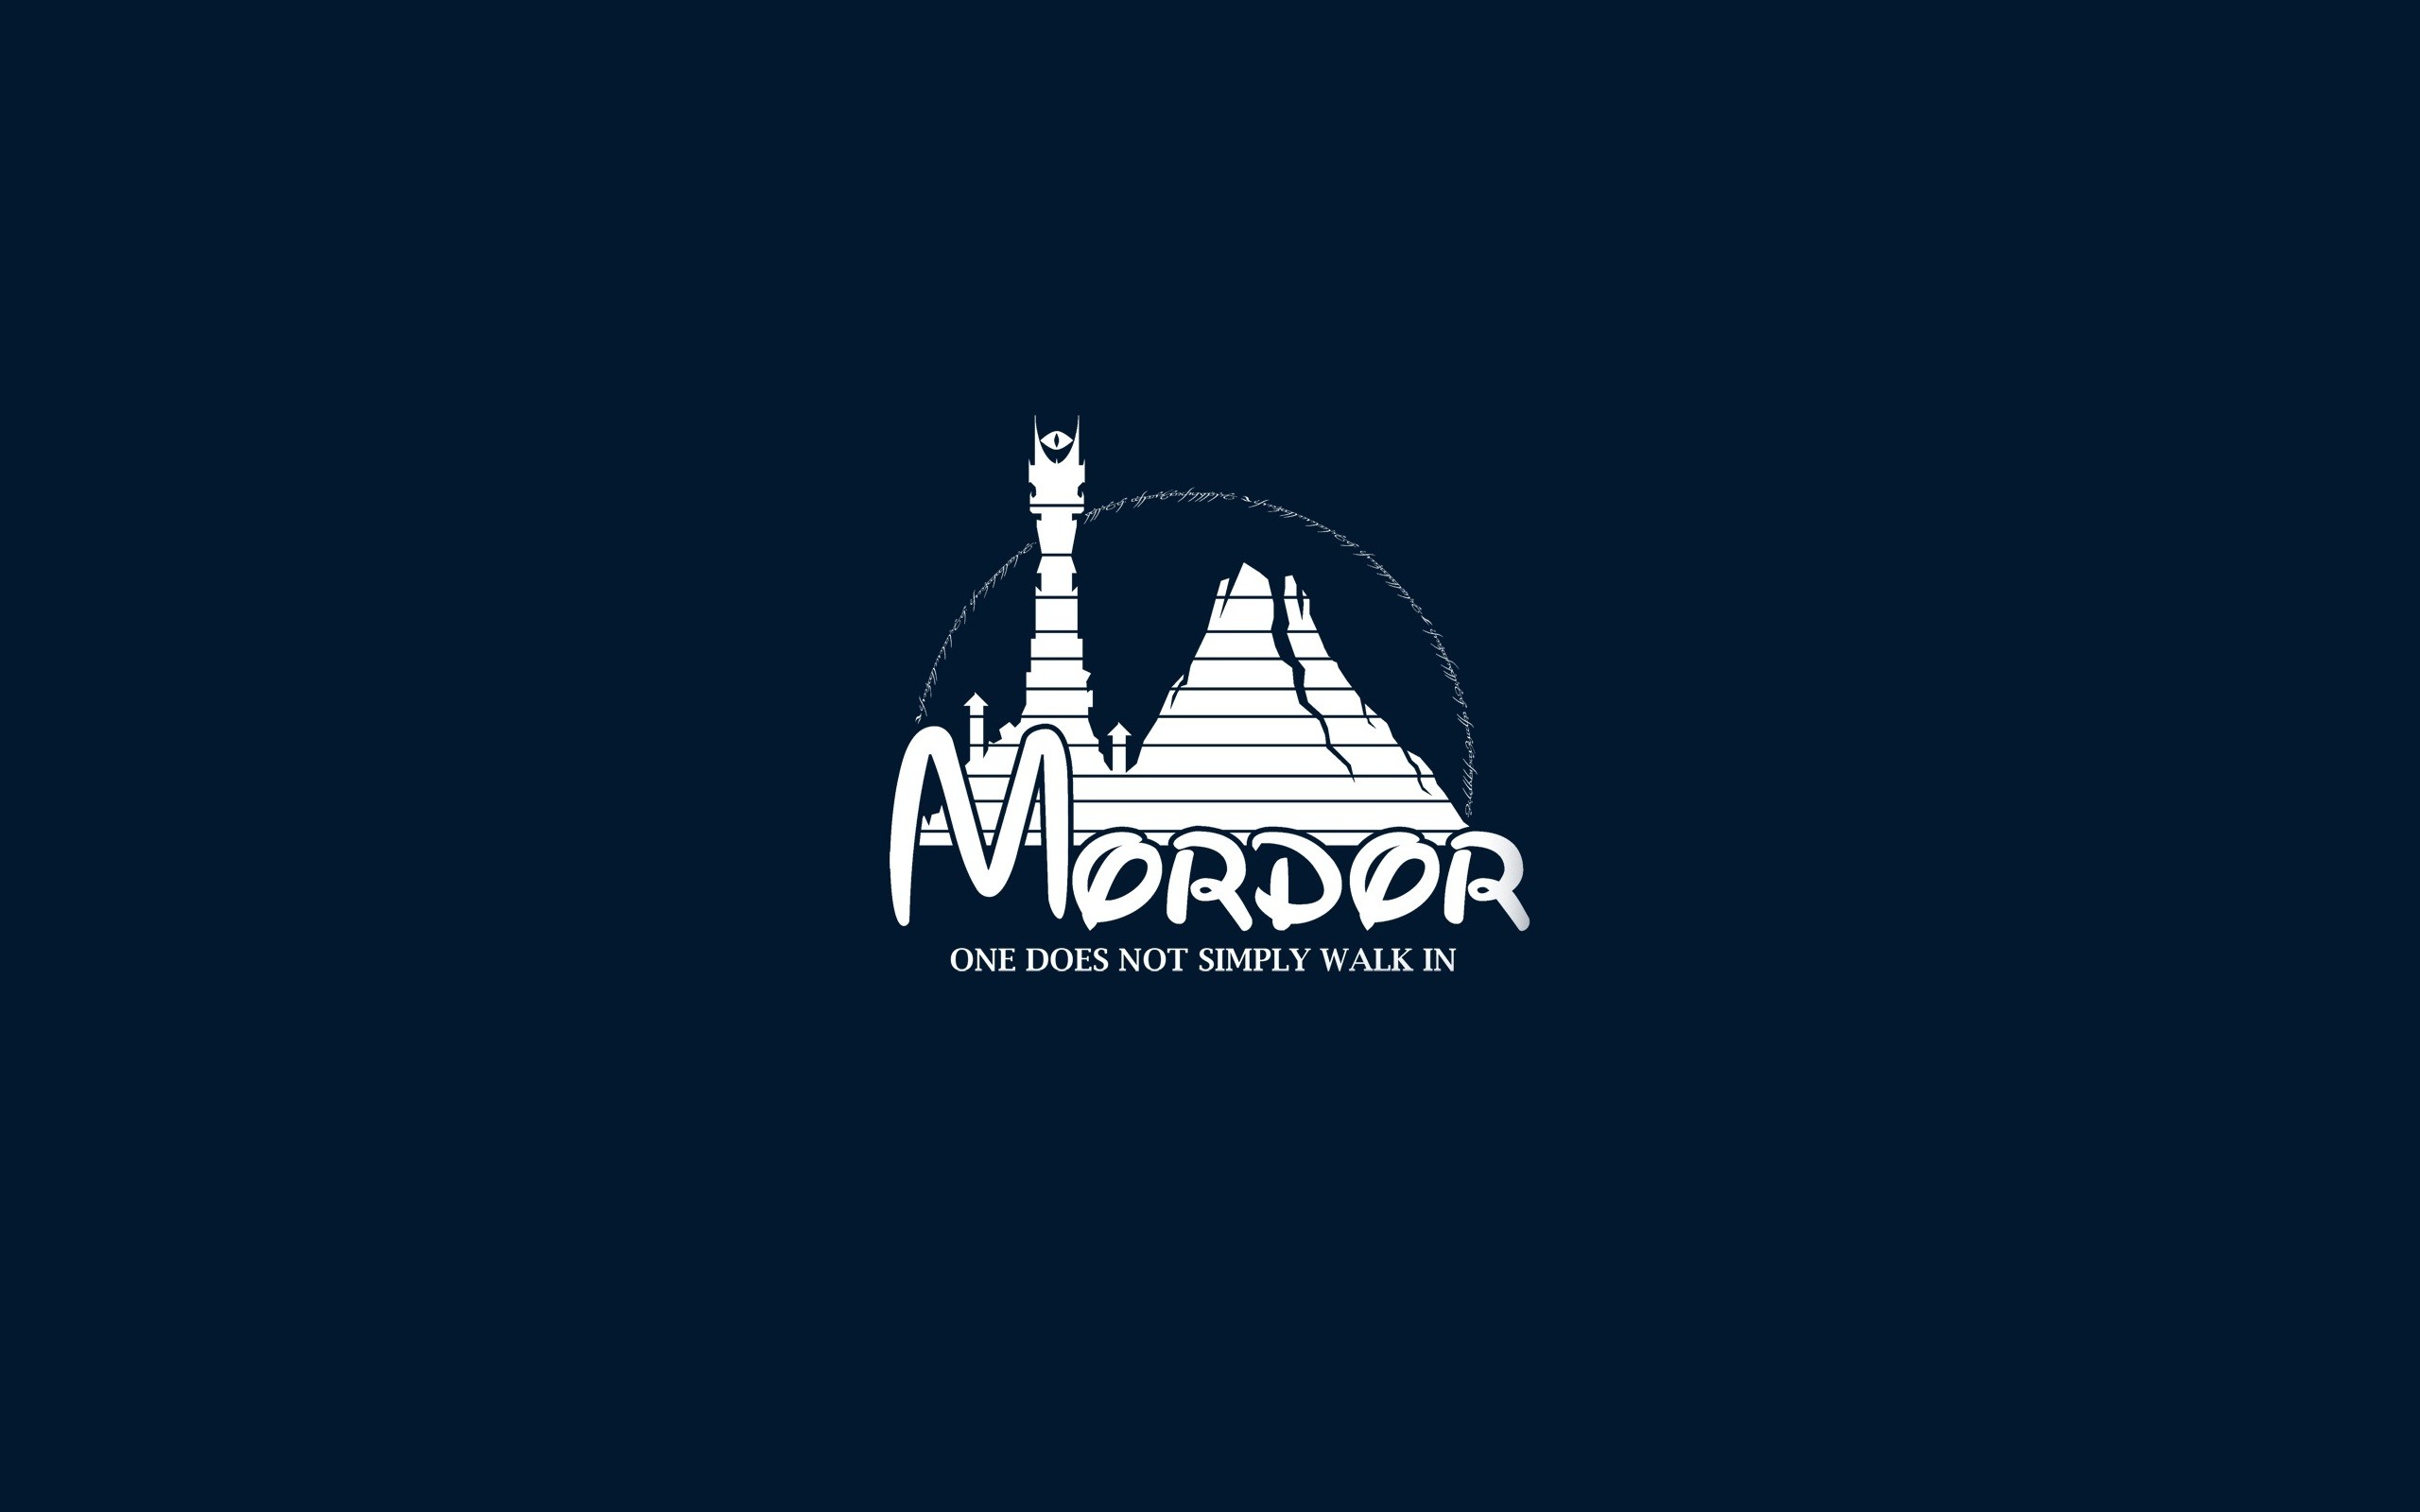 disney, Company, Minimalistic, Funny, The, Lord, Of, The, Rings, Mordor, Artwork Wallpaper